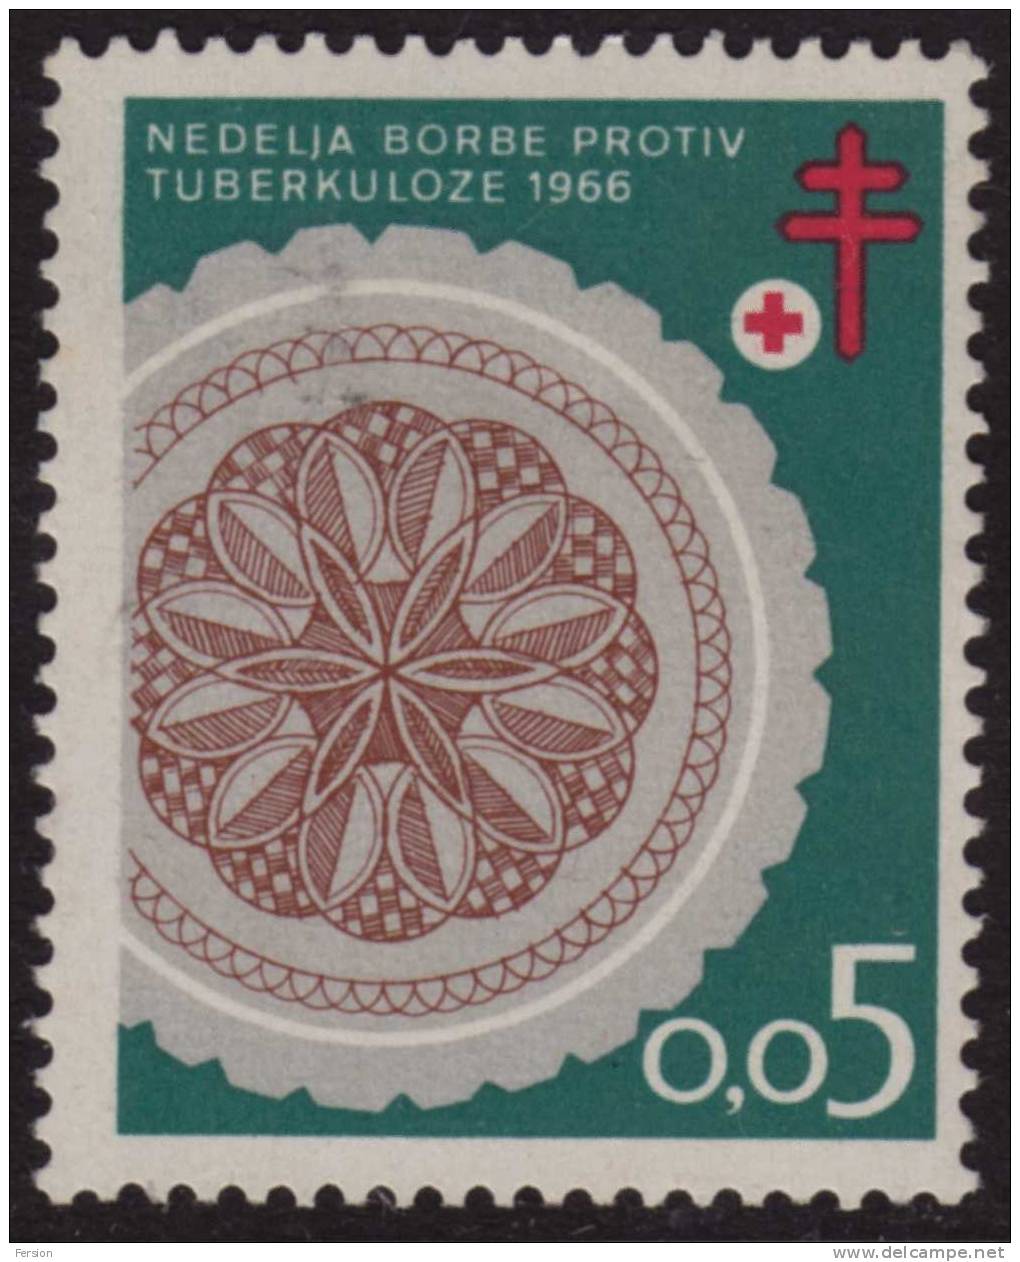 1966 Yugoslavia - Red Cross - Tuberculosis - Additional Stamp - MNH - Charity Issues